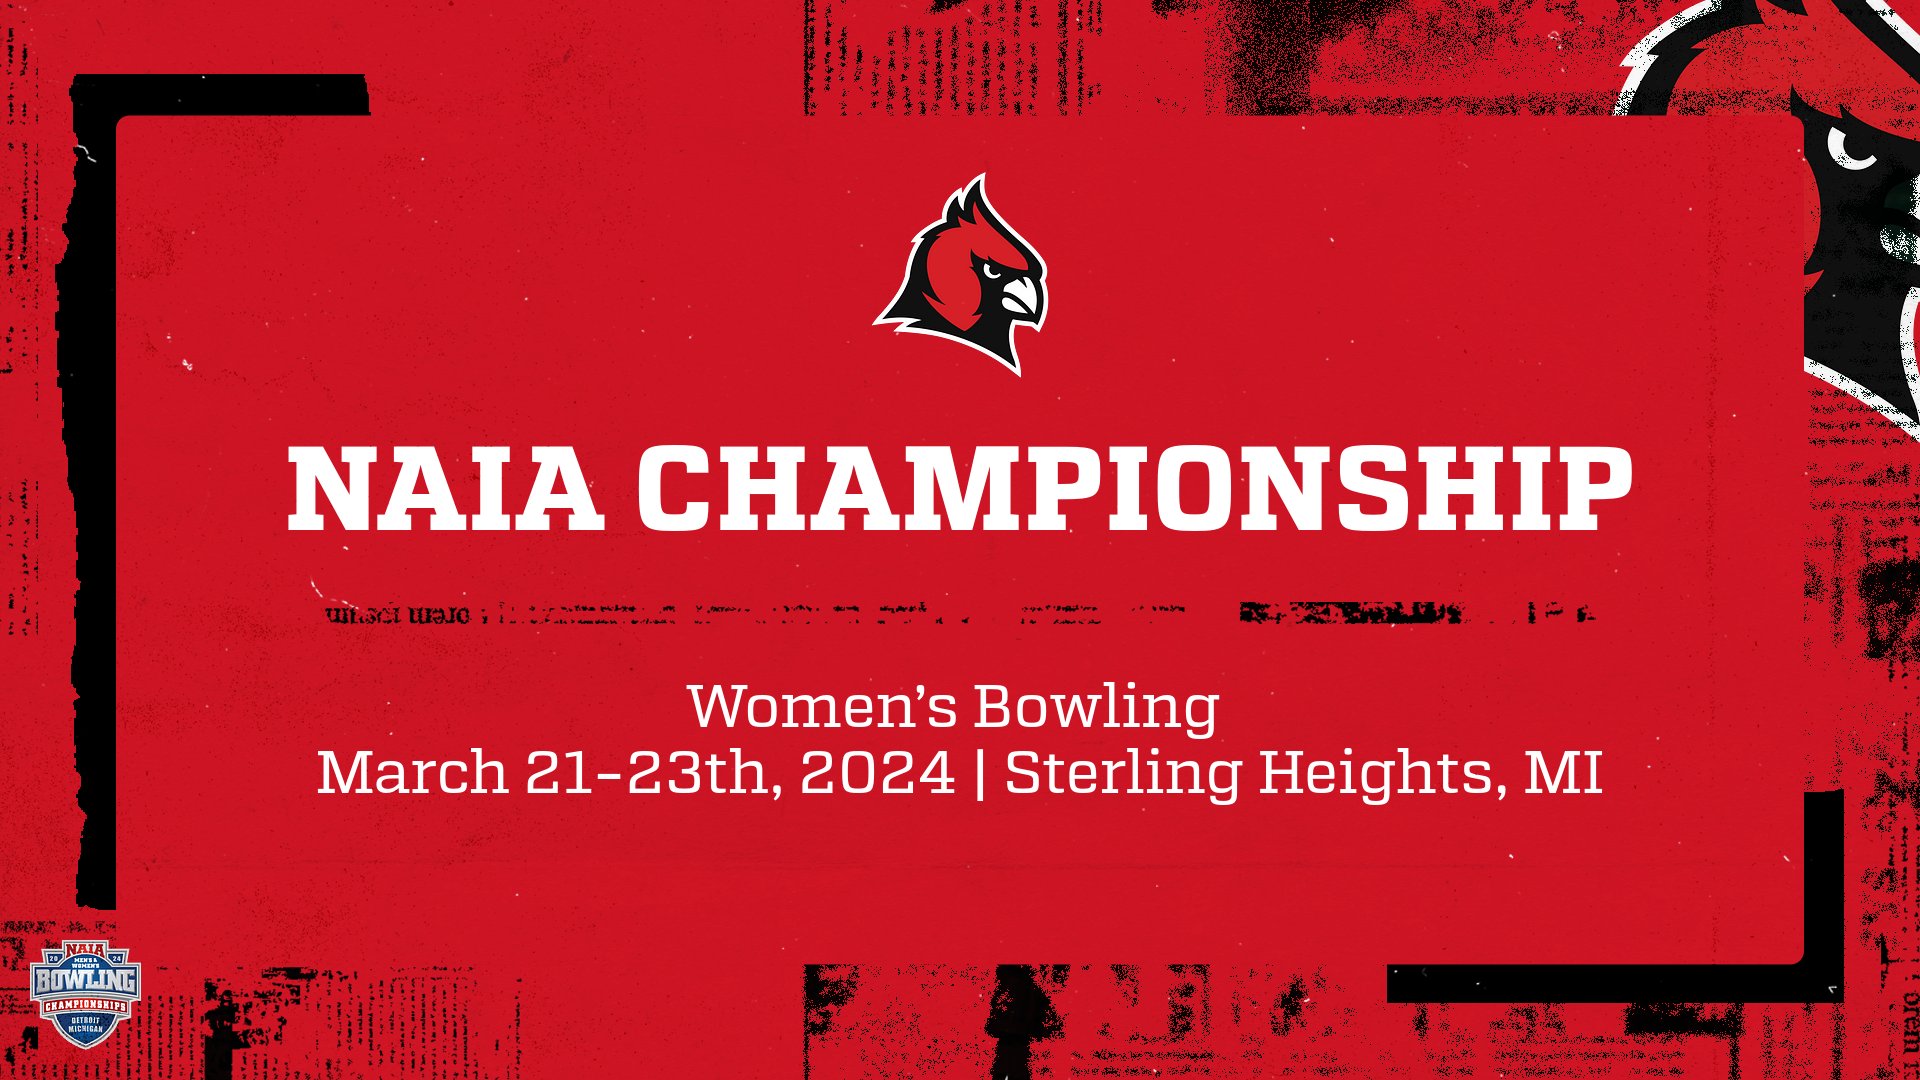 NAIA CHAMPIONSHIP PREVIEW: Women's Bowling set to compete at NAIA National Championships this weekend